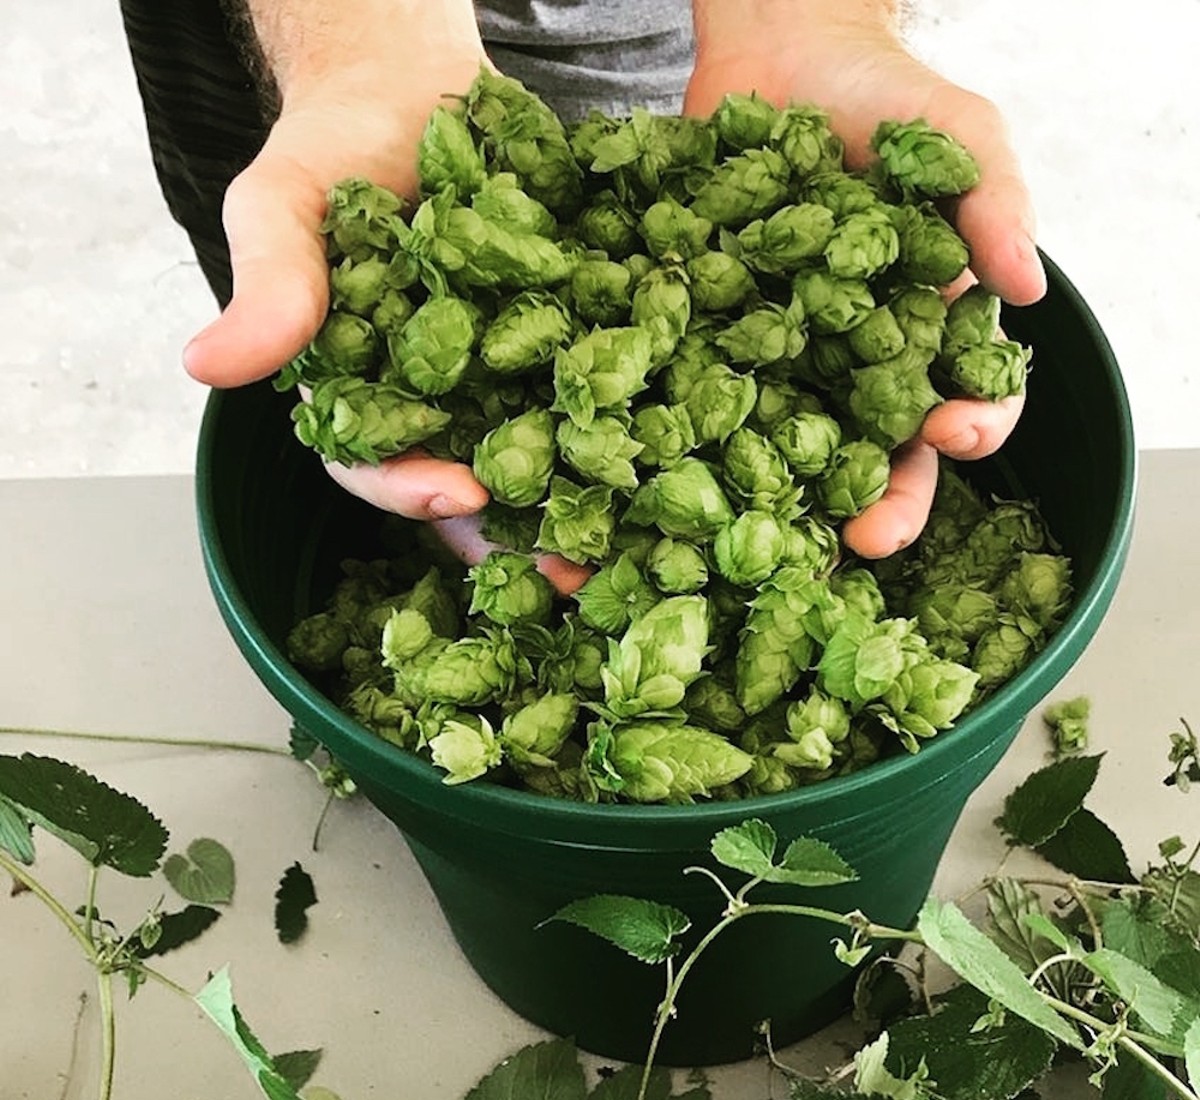 A handful of hops grown in Florida